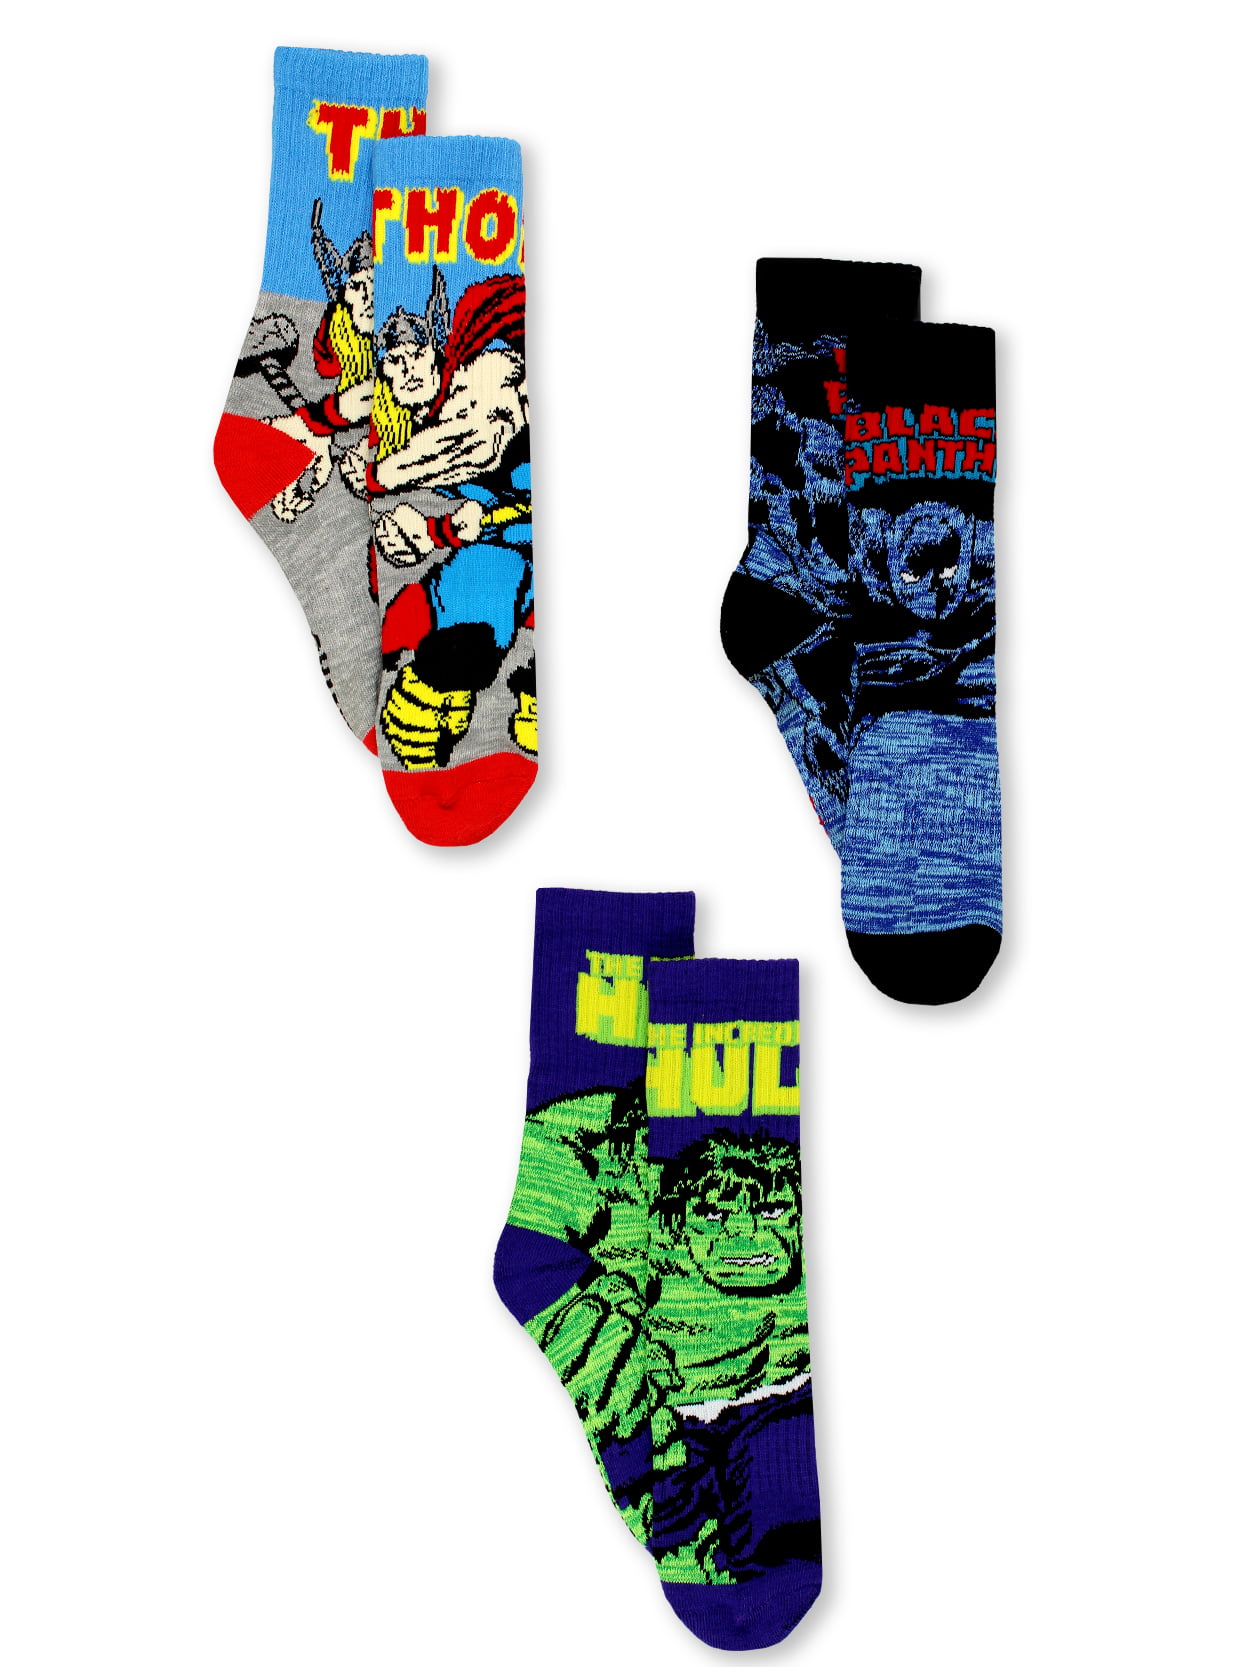 Details about   Marvel Avengers Assemble Boy's Youth Kids Superhero Socks ONE SIZE FITS MOST NWT 